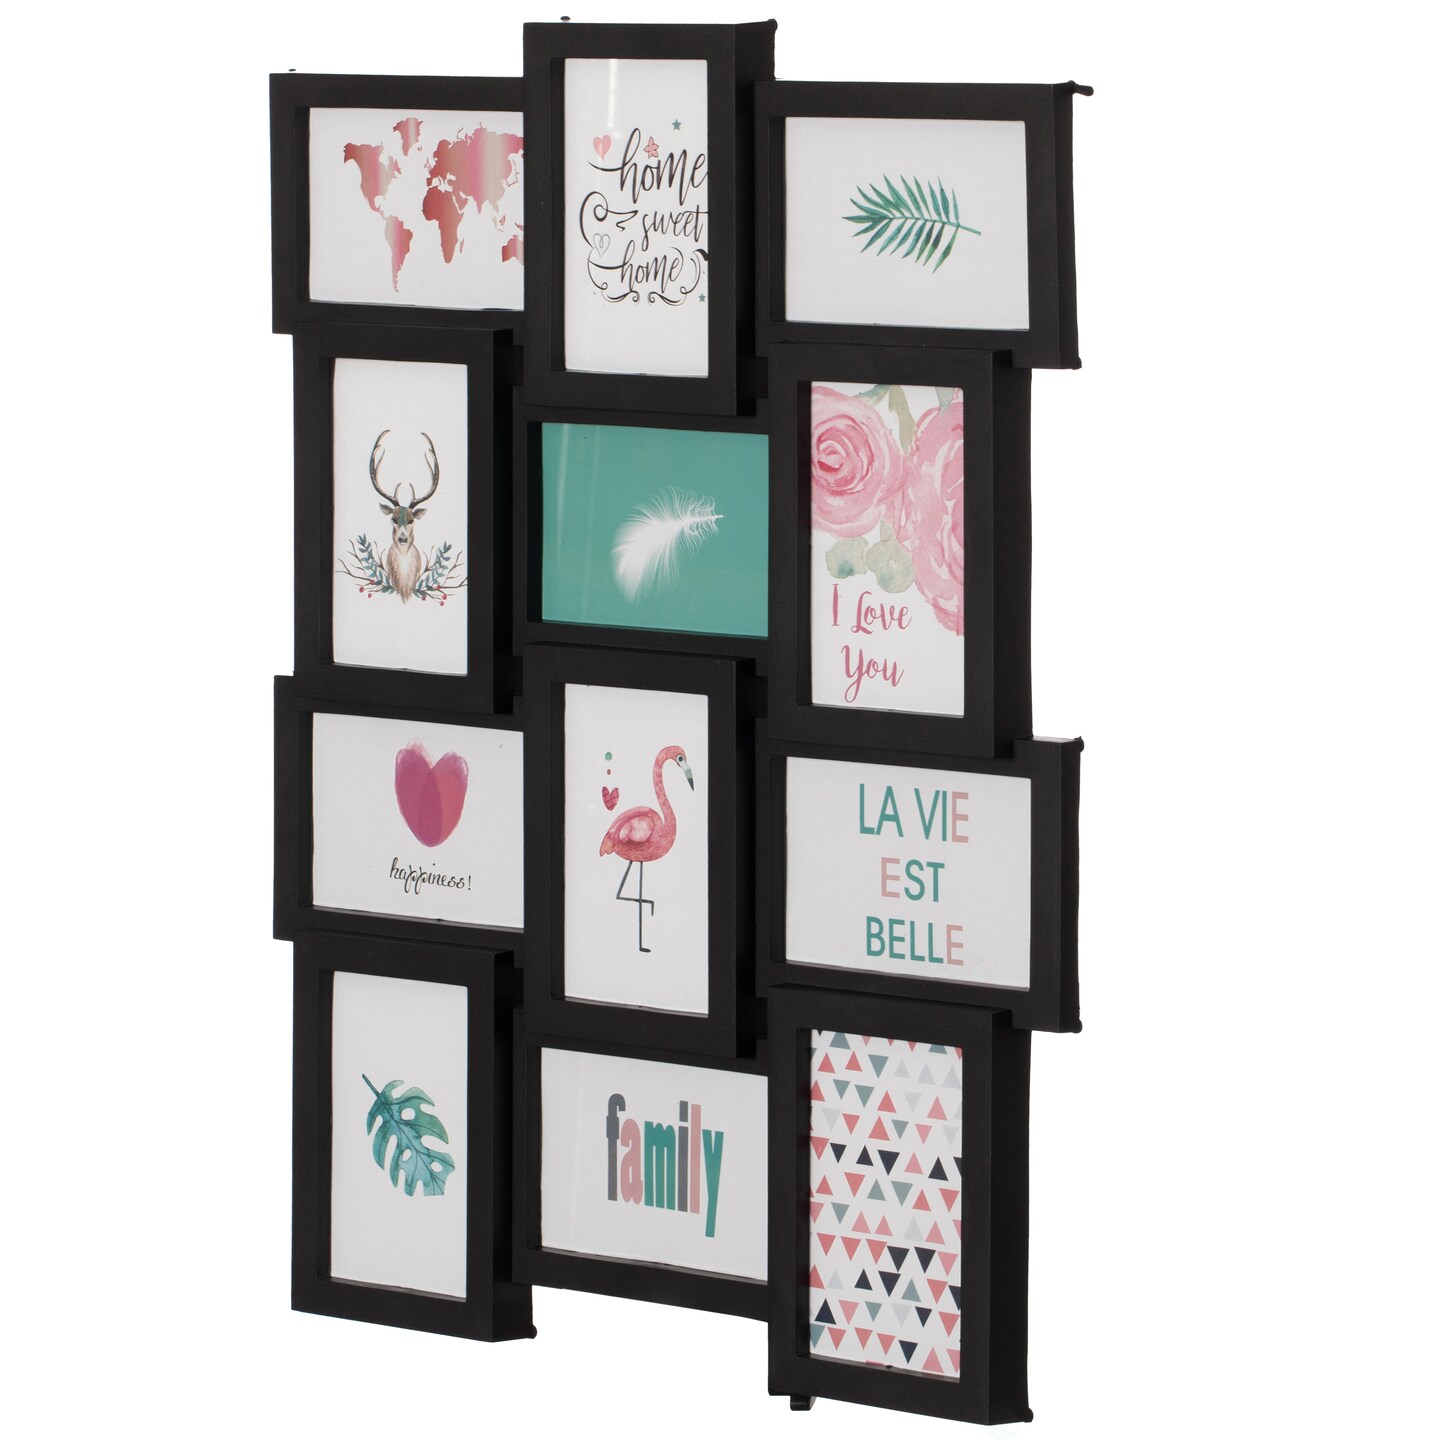 Decorative Modern Wall Mounted Multi Photo Frame Collage Picture Holder for 12 Pictures 4 x 6 Inch, Black